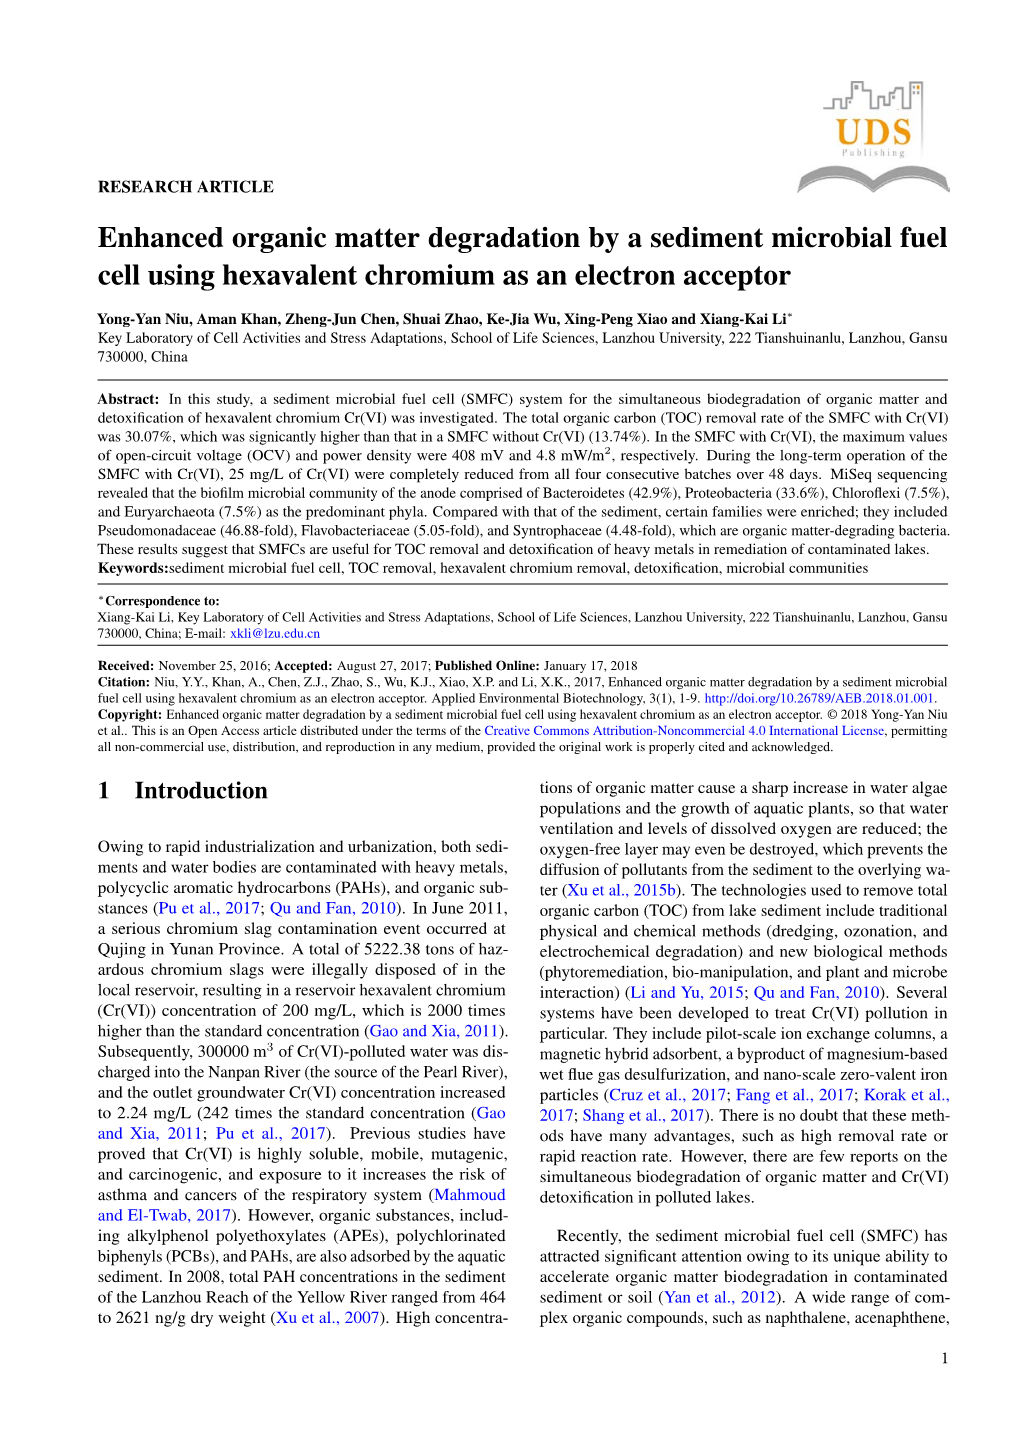 Enhanced Organic Matter Degradation by a Sediment Microbial Fuel Cell Using Hexavalent Chromium As an Electron Acceptor